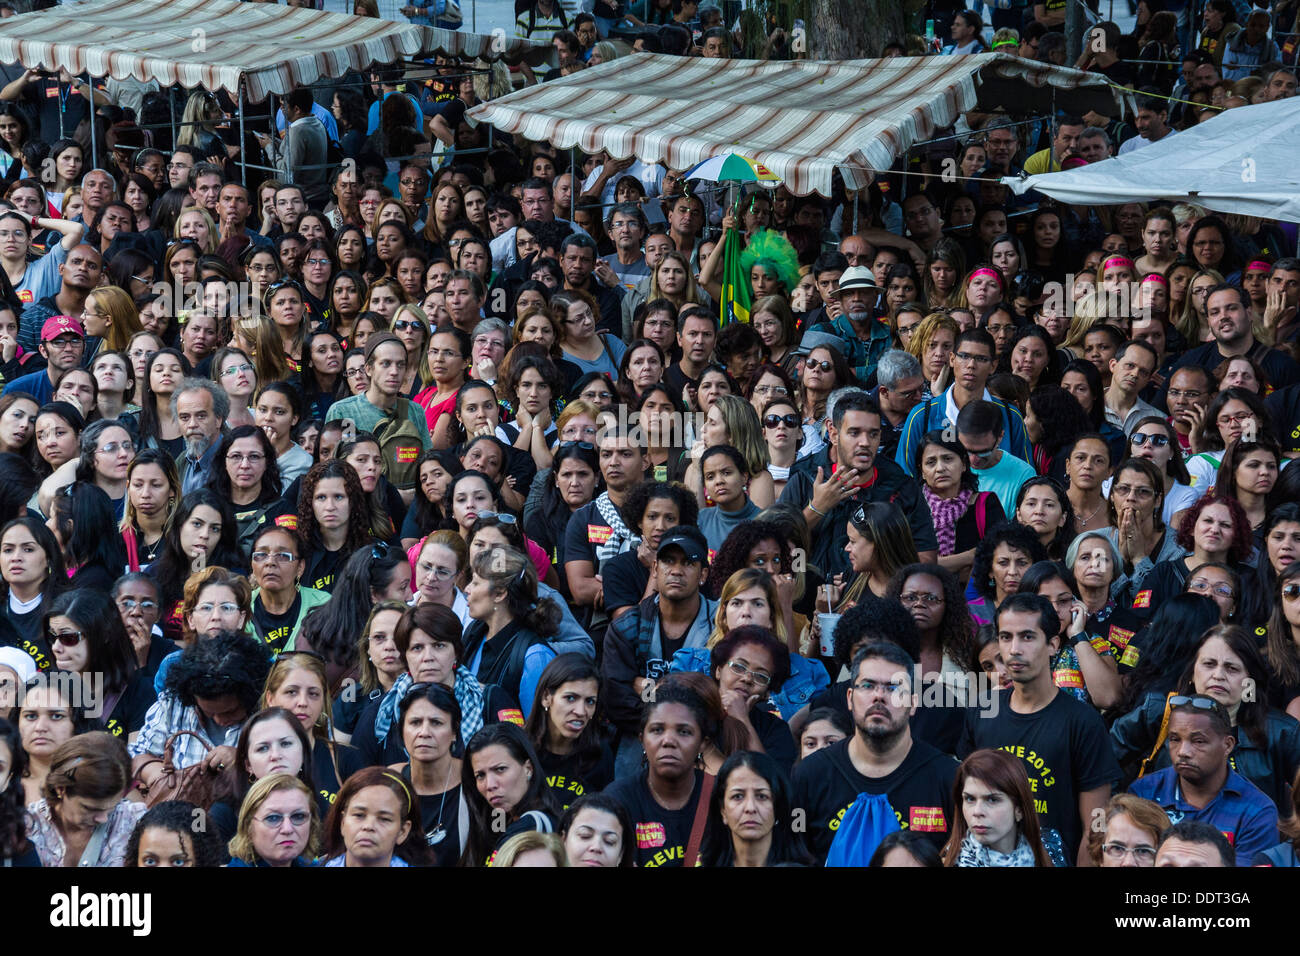 Teachers of municipal schools of Rio de Janeiro, vote for the continuation of the strike in the assembly (August 28, 2013) Stock Photo